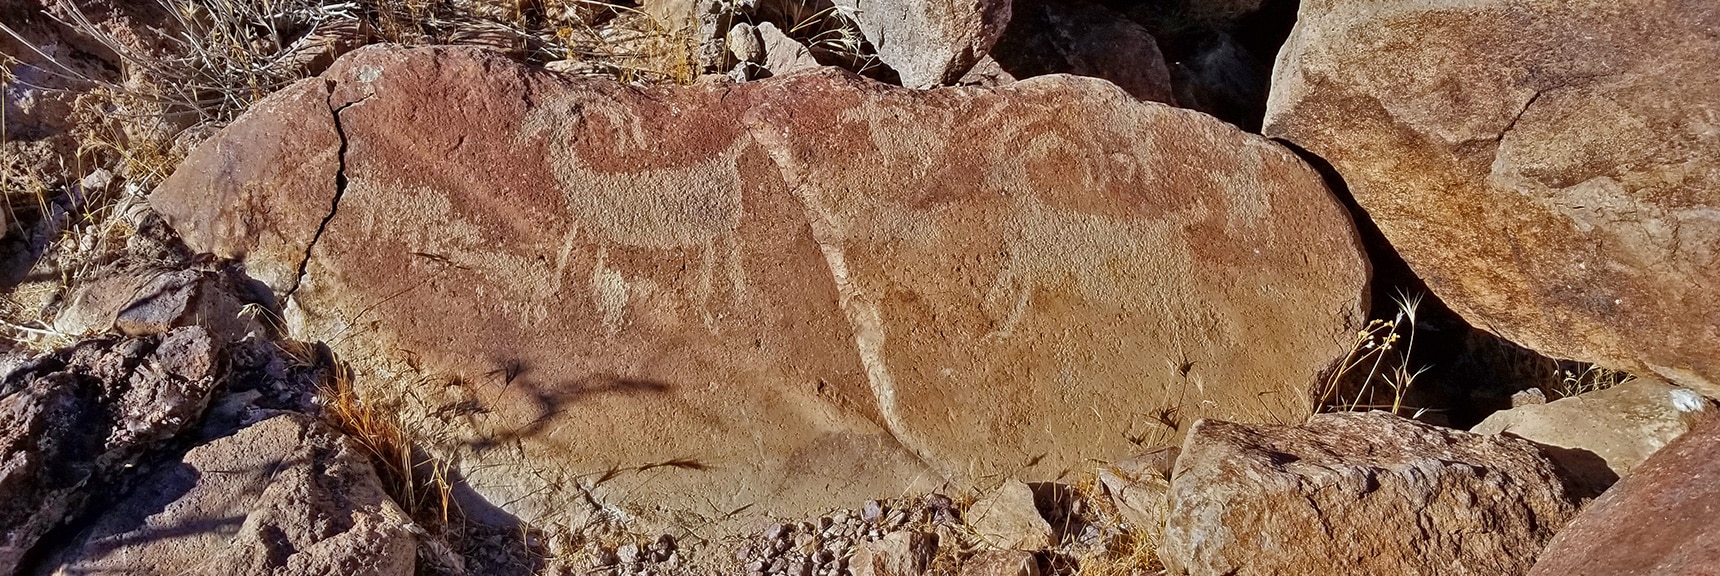 Now the Petroglyphs Appear! | Petroglyph Canyon | Sloan Canyon National Conservation Area, Nevada